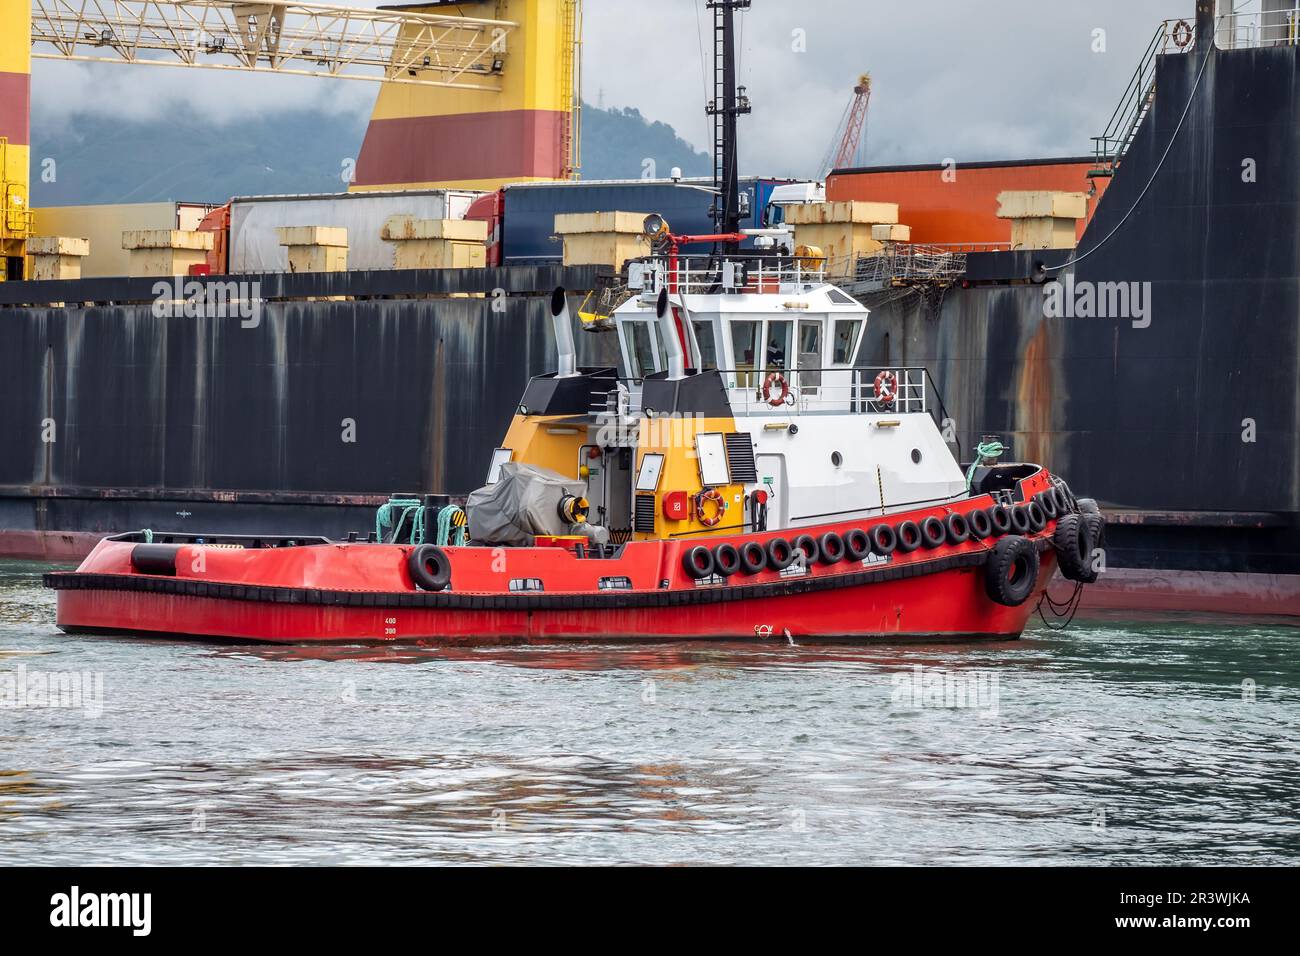 Tugboat push large cargo ship that has arrived at port dock. Freight sea transportation concept. Stock Photo